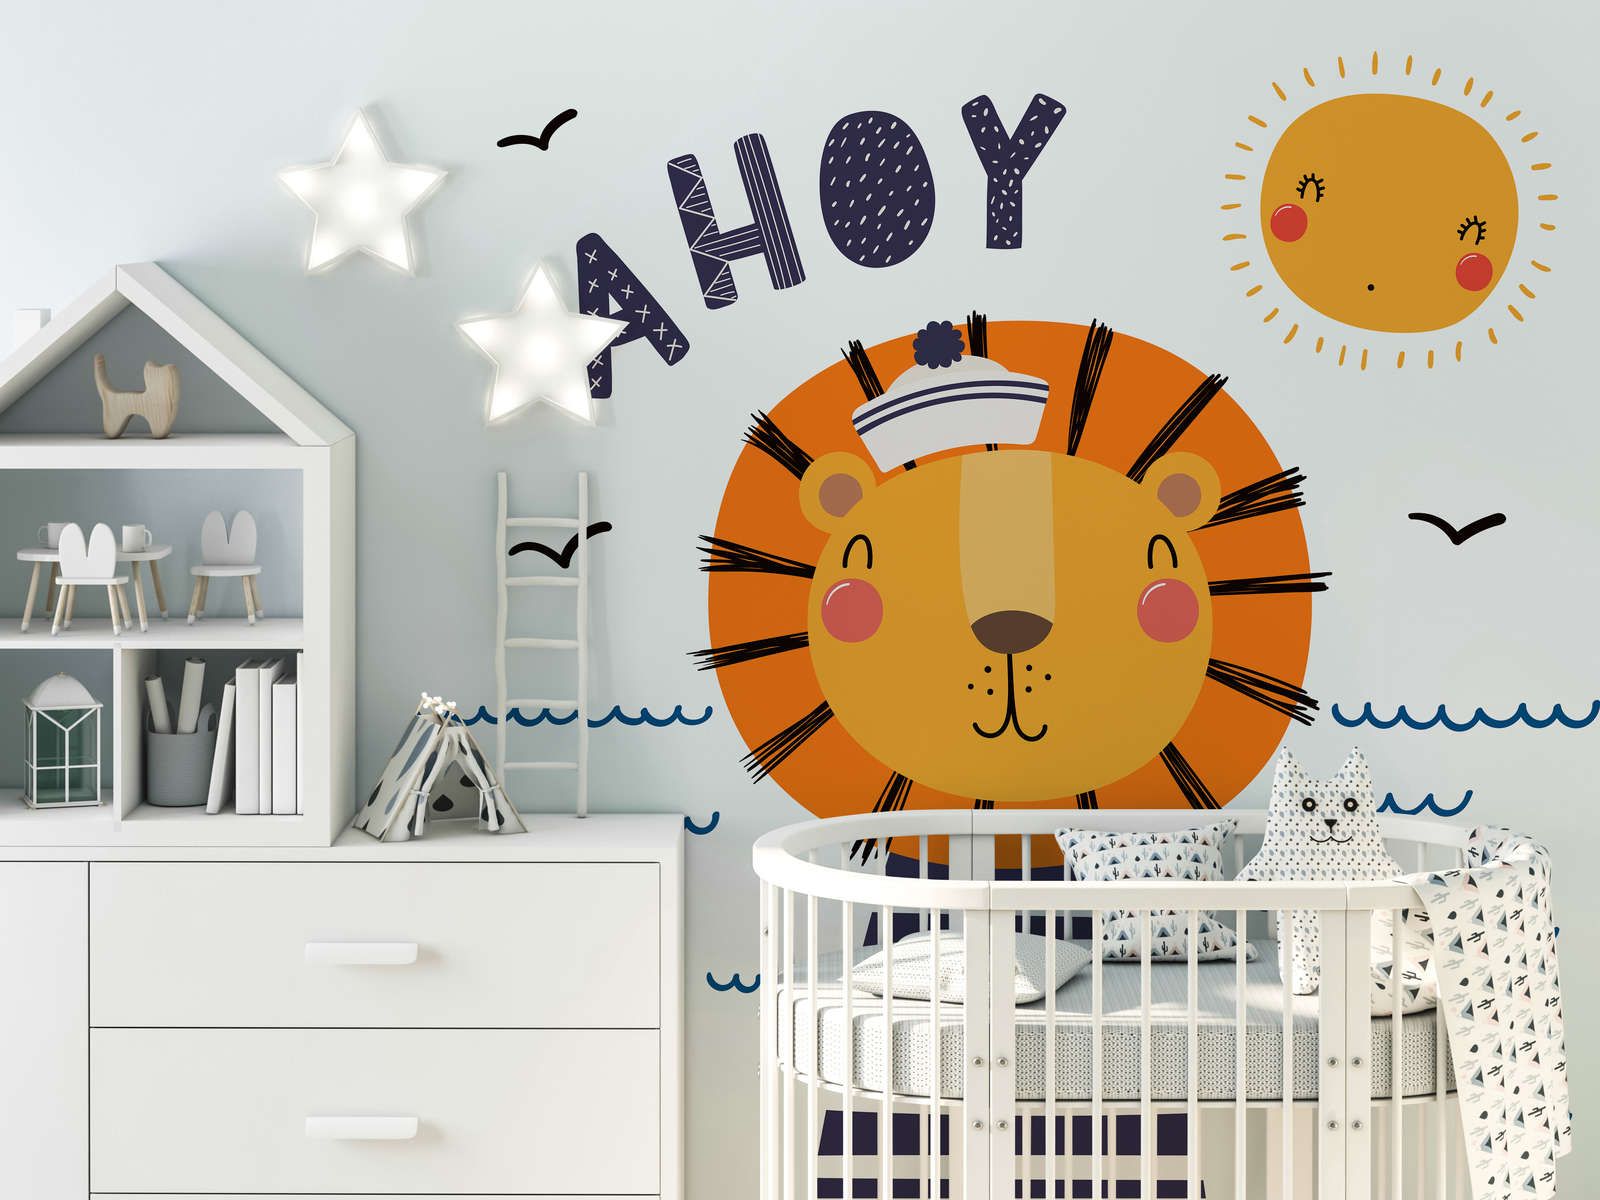             Children's Room Wallpaper with Lion Pirate - Textured non-woven
        